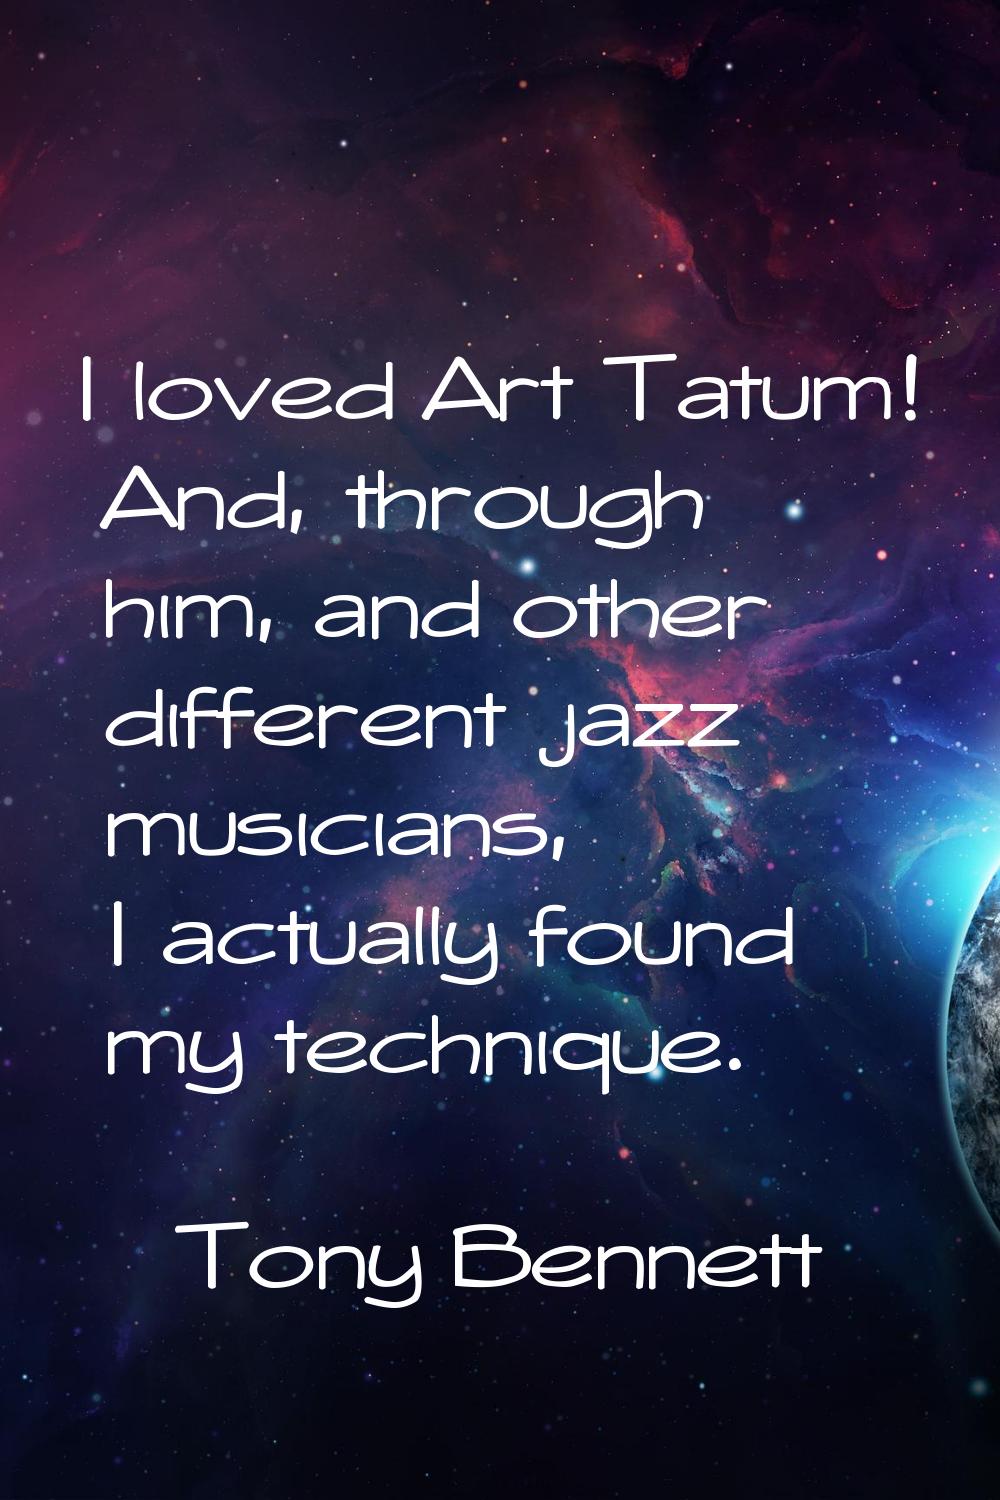 I loved Art Tatum! And, through him, and other different jazz musicians, I actually found my techni